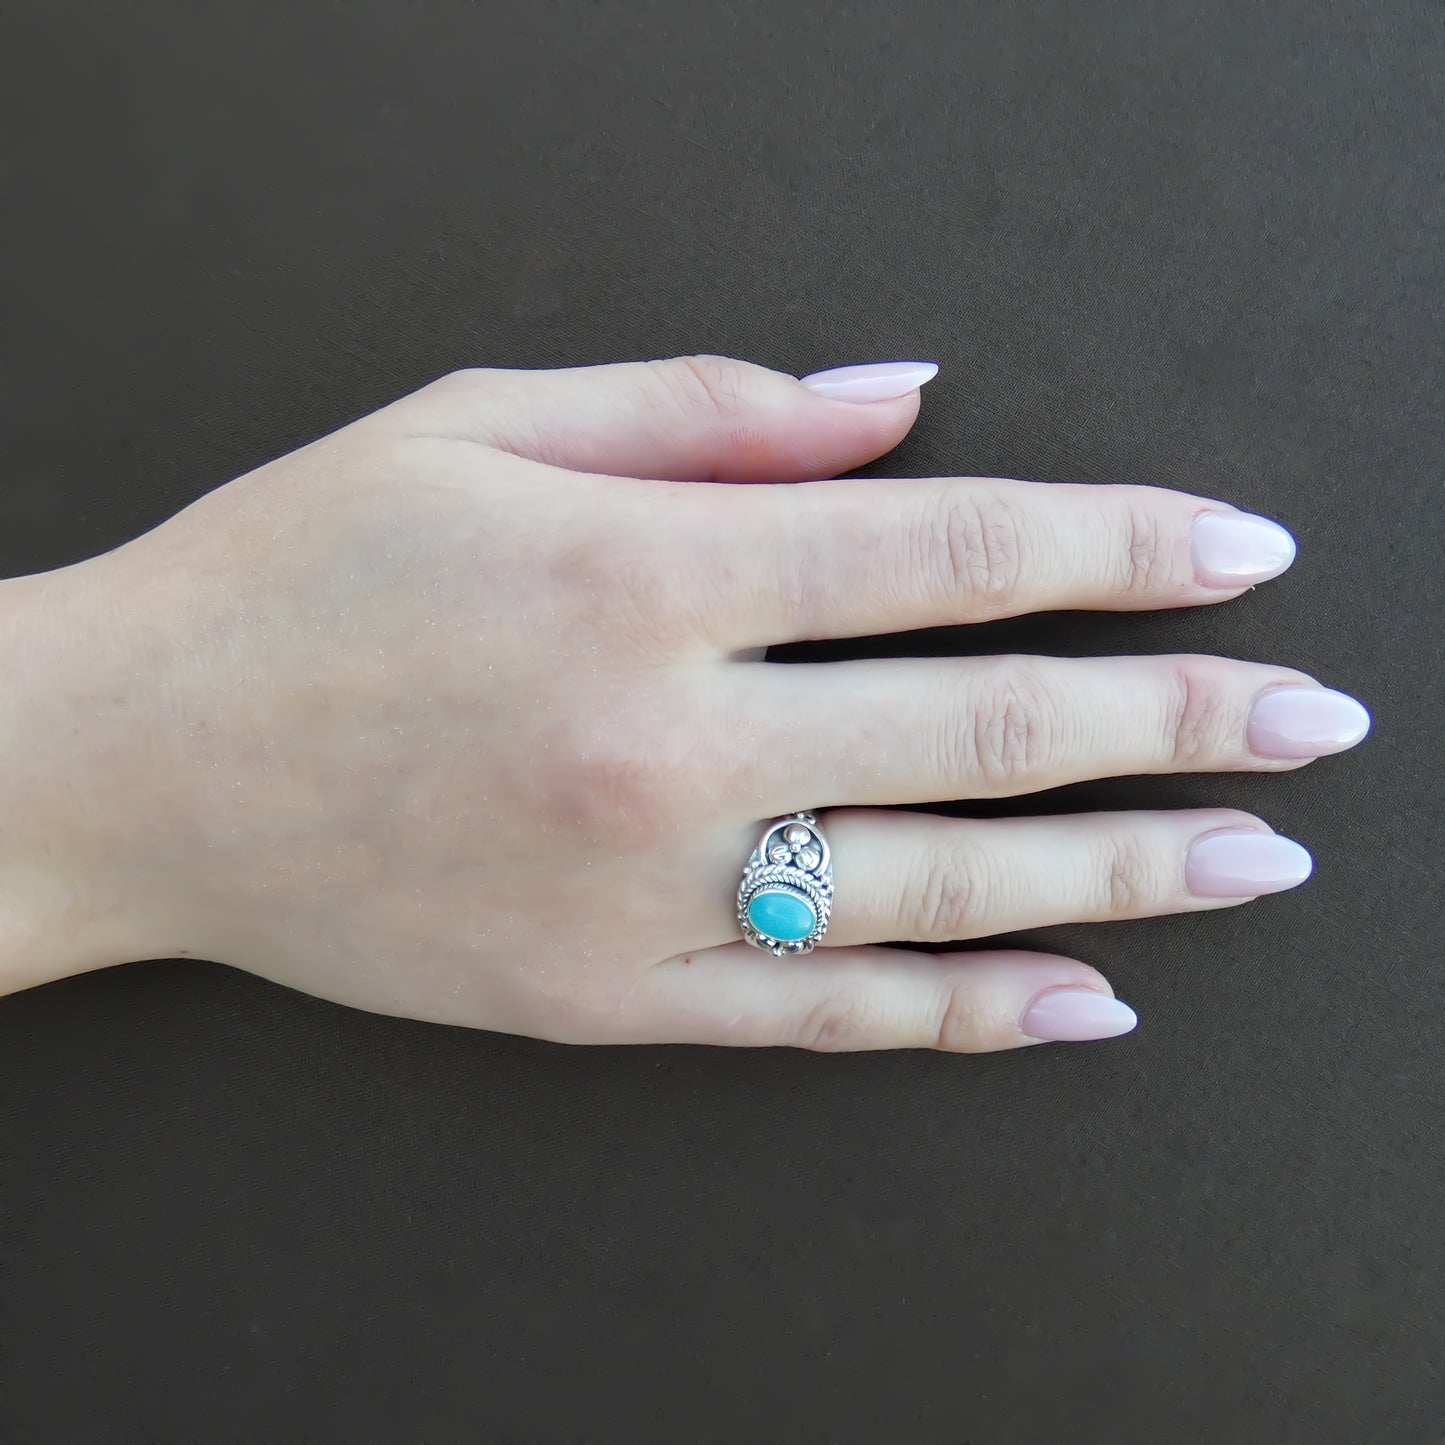 R012AZ PADMA Sterling Silver Ring with Ocean Blue Amazonite